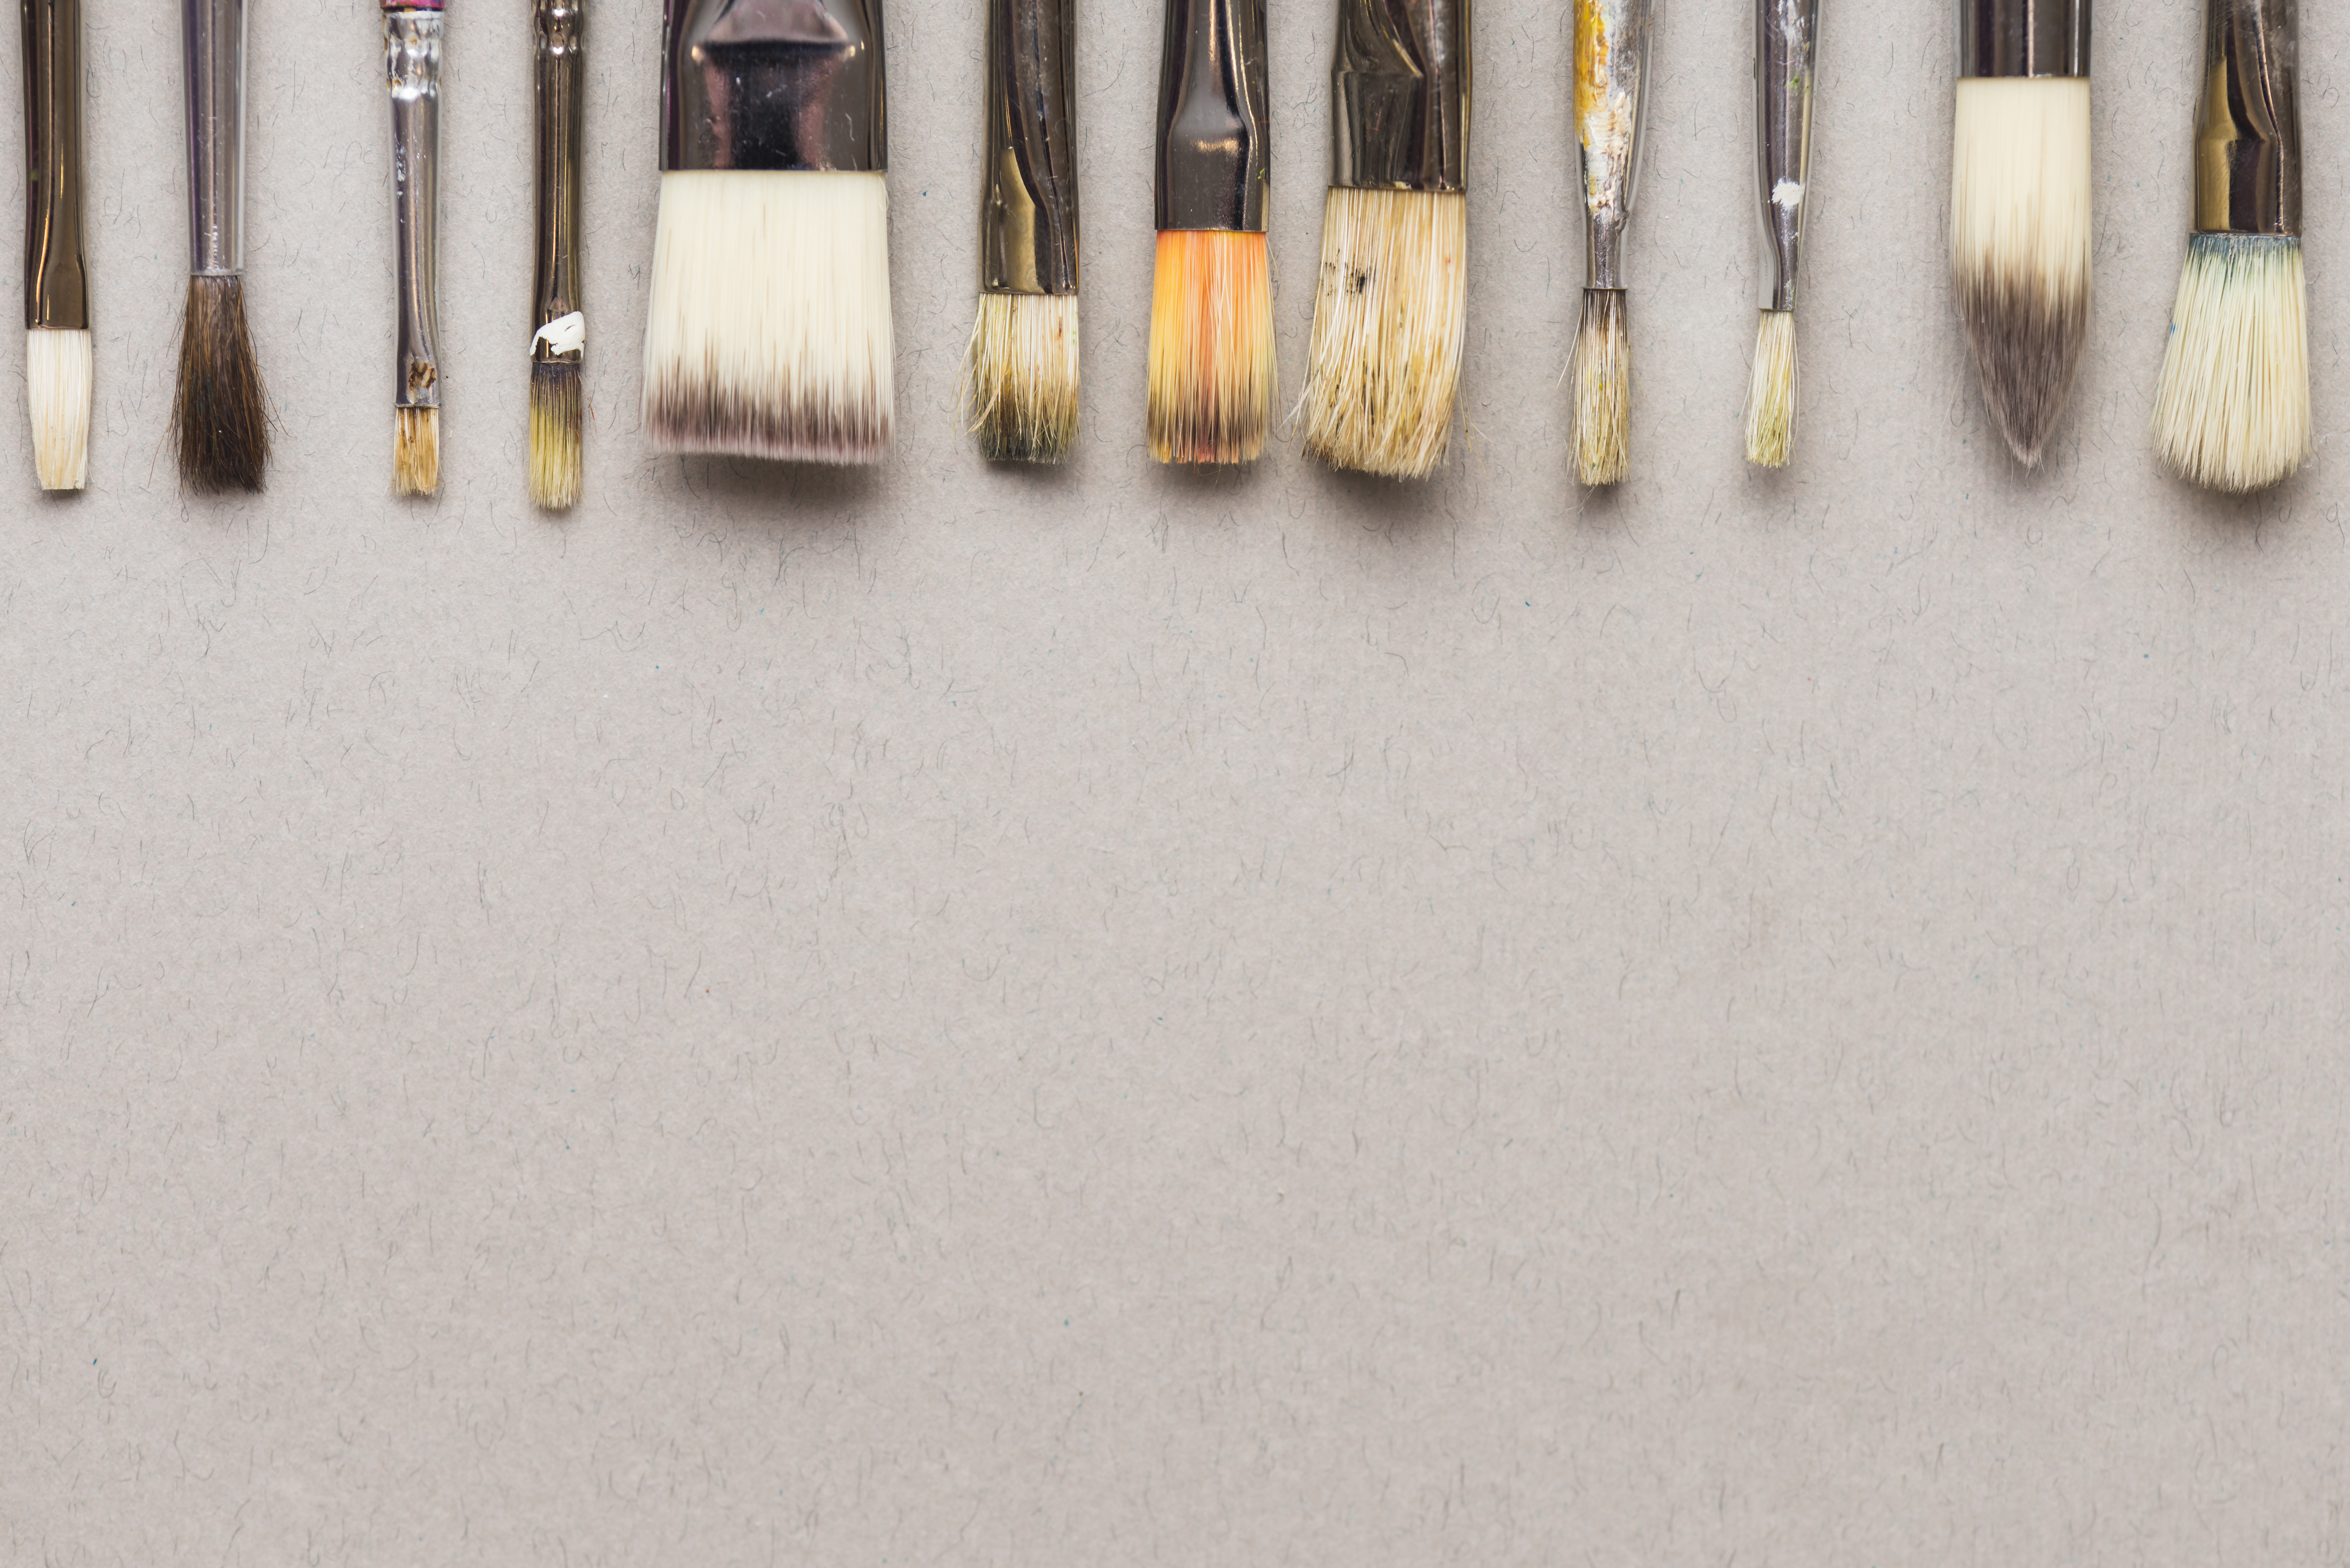 Various paintbrushes lined up along top of photo. The background is beige.